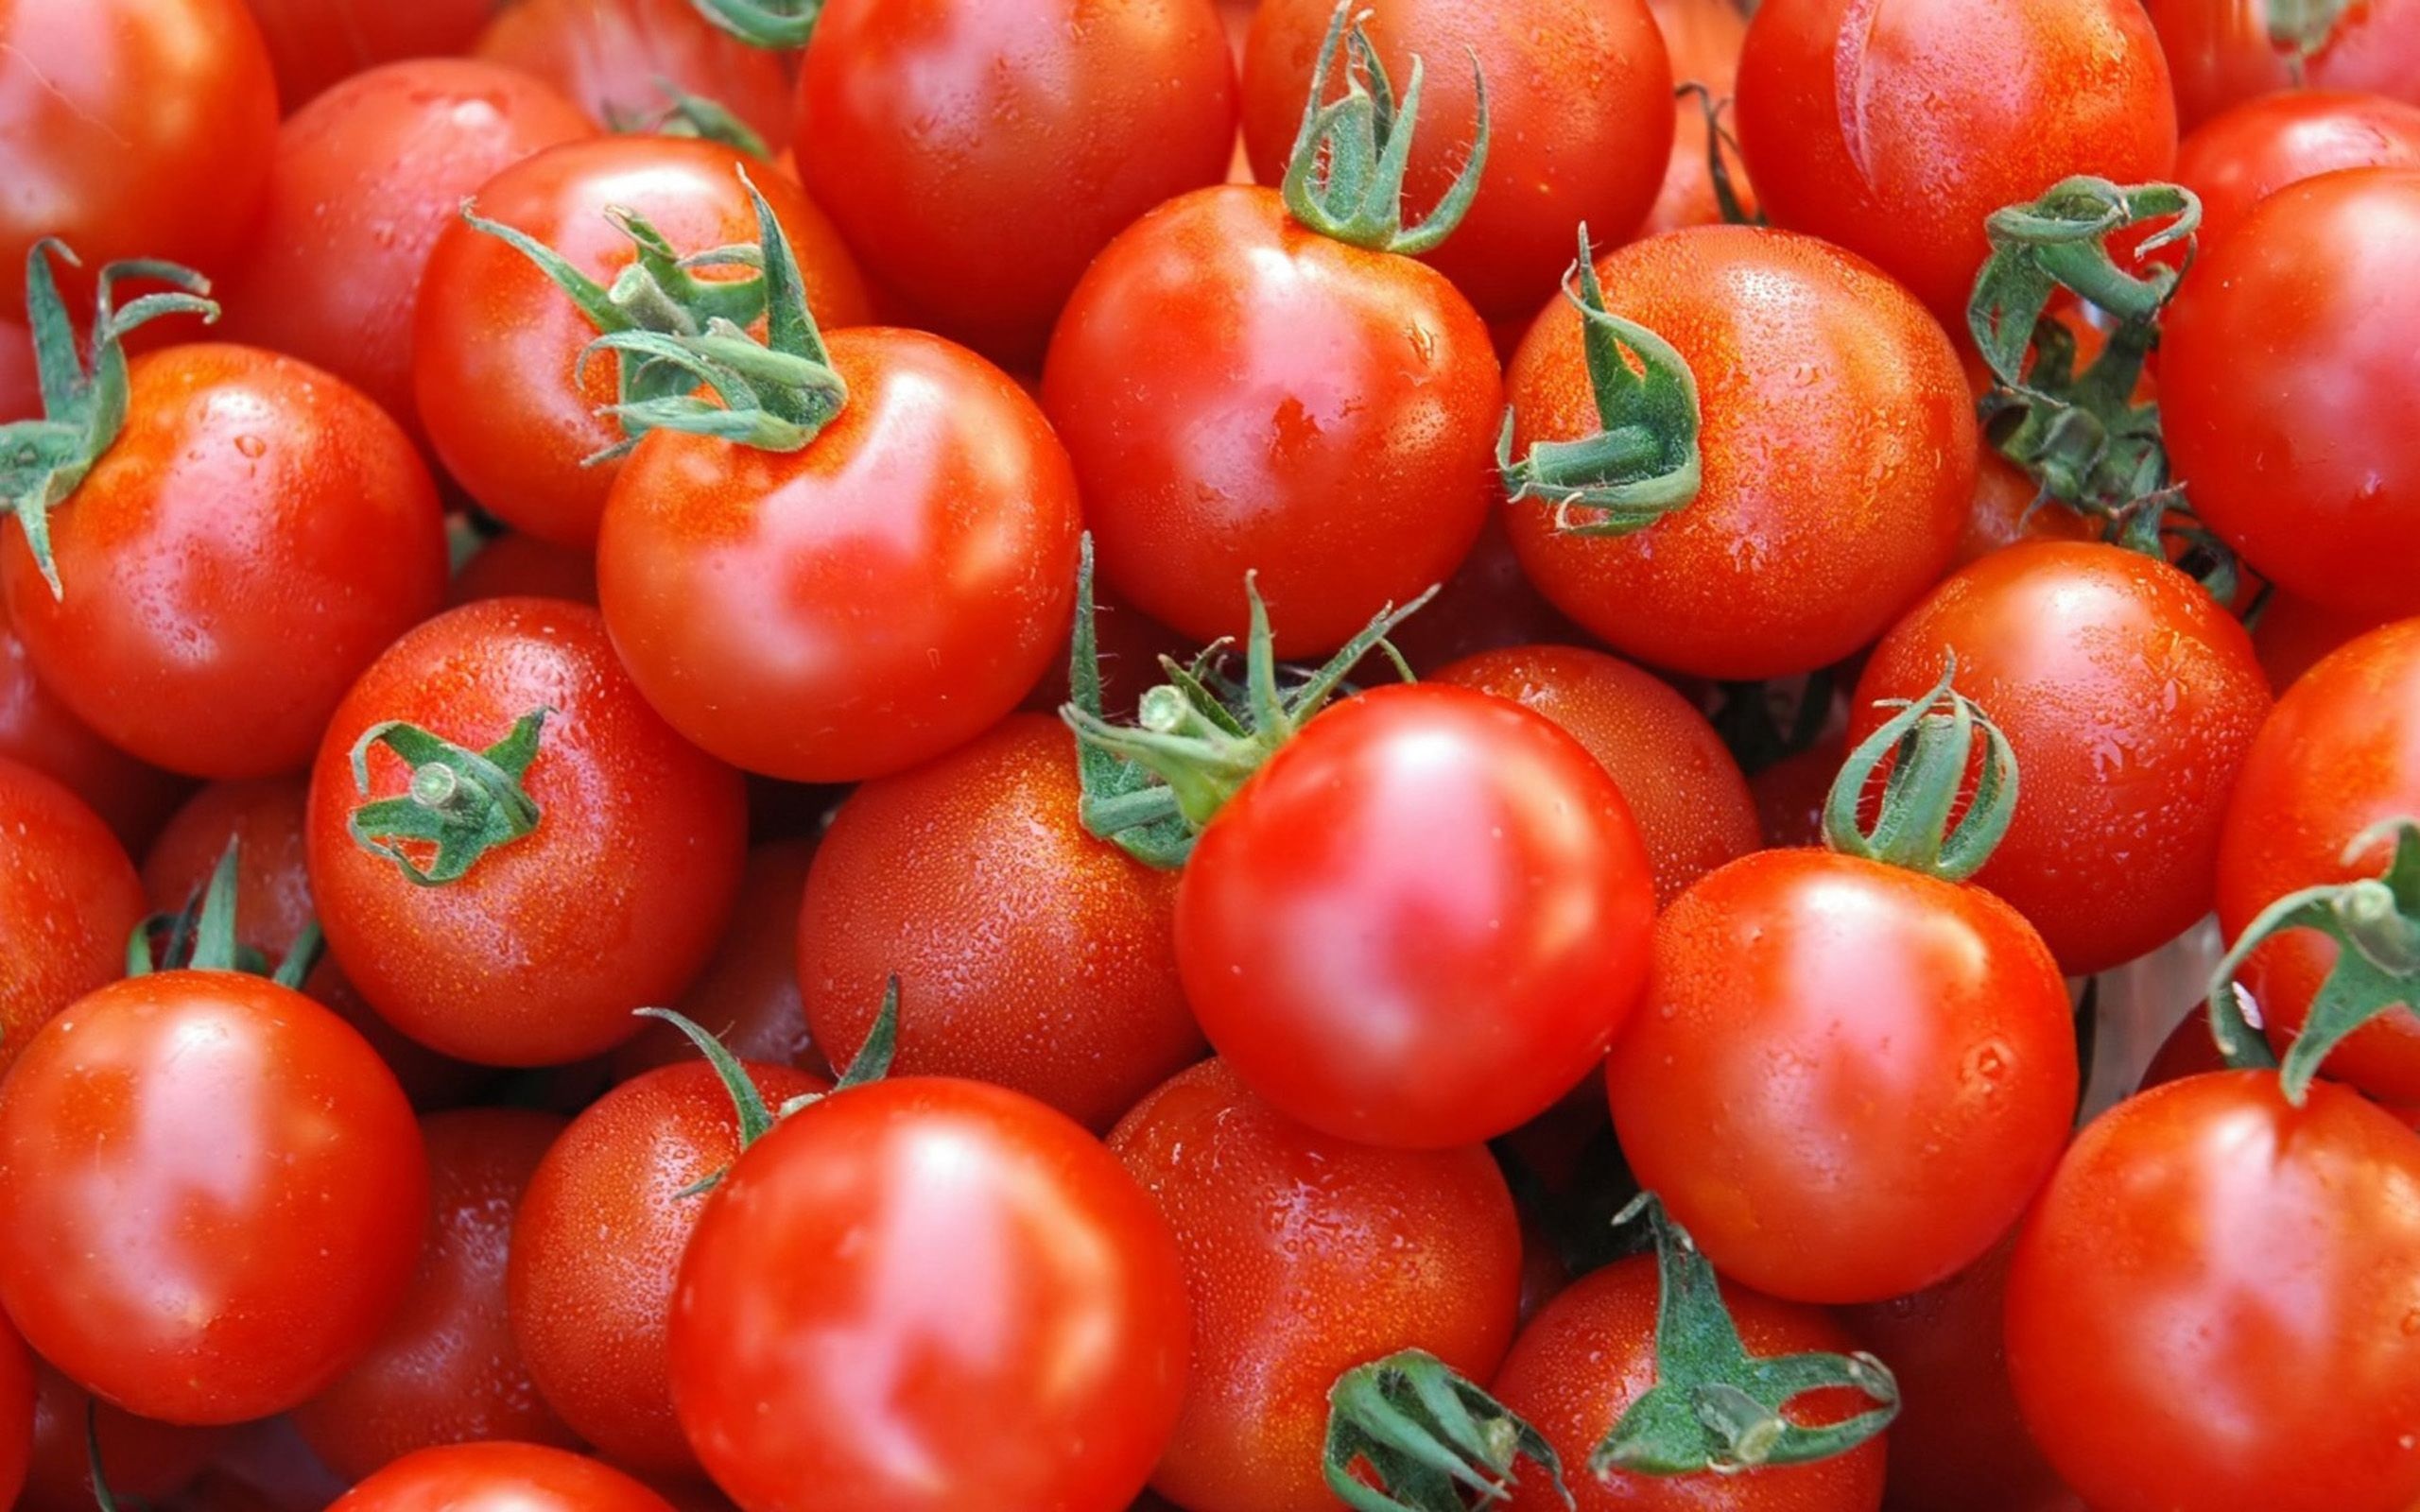 Tomato wallpapers, Free backgrounds, HD images, Visual inspiration, 2560x1600 HD Desktop